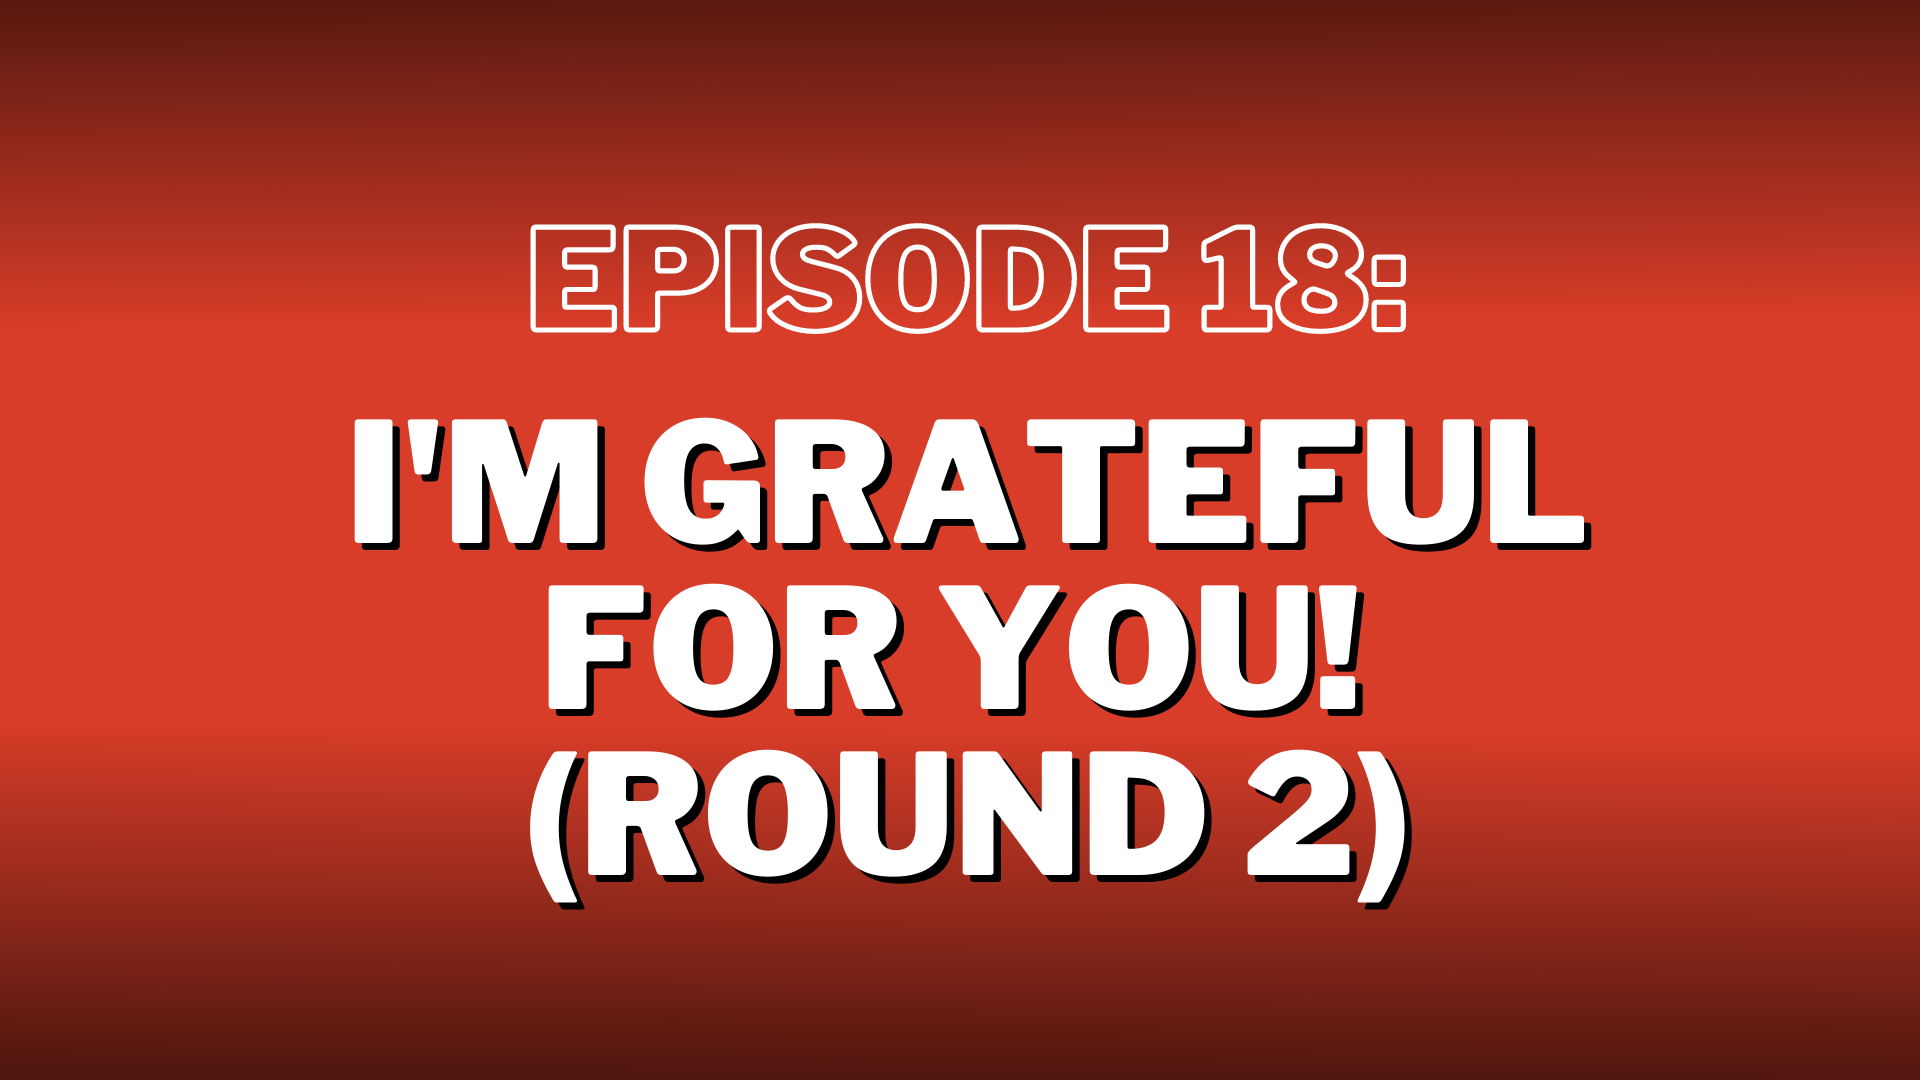 S3. Episode 18: I’m Grateful For YOU! (Round 2) – Show Notes